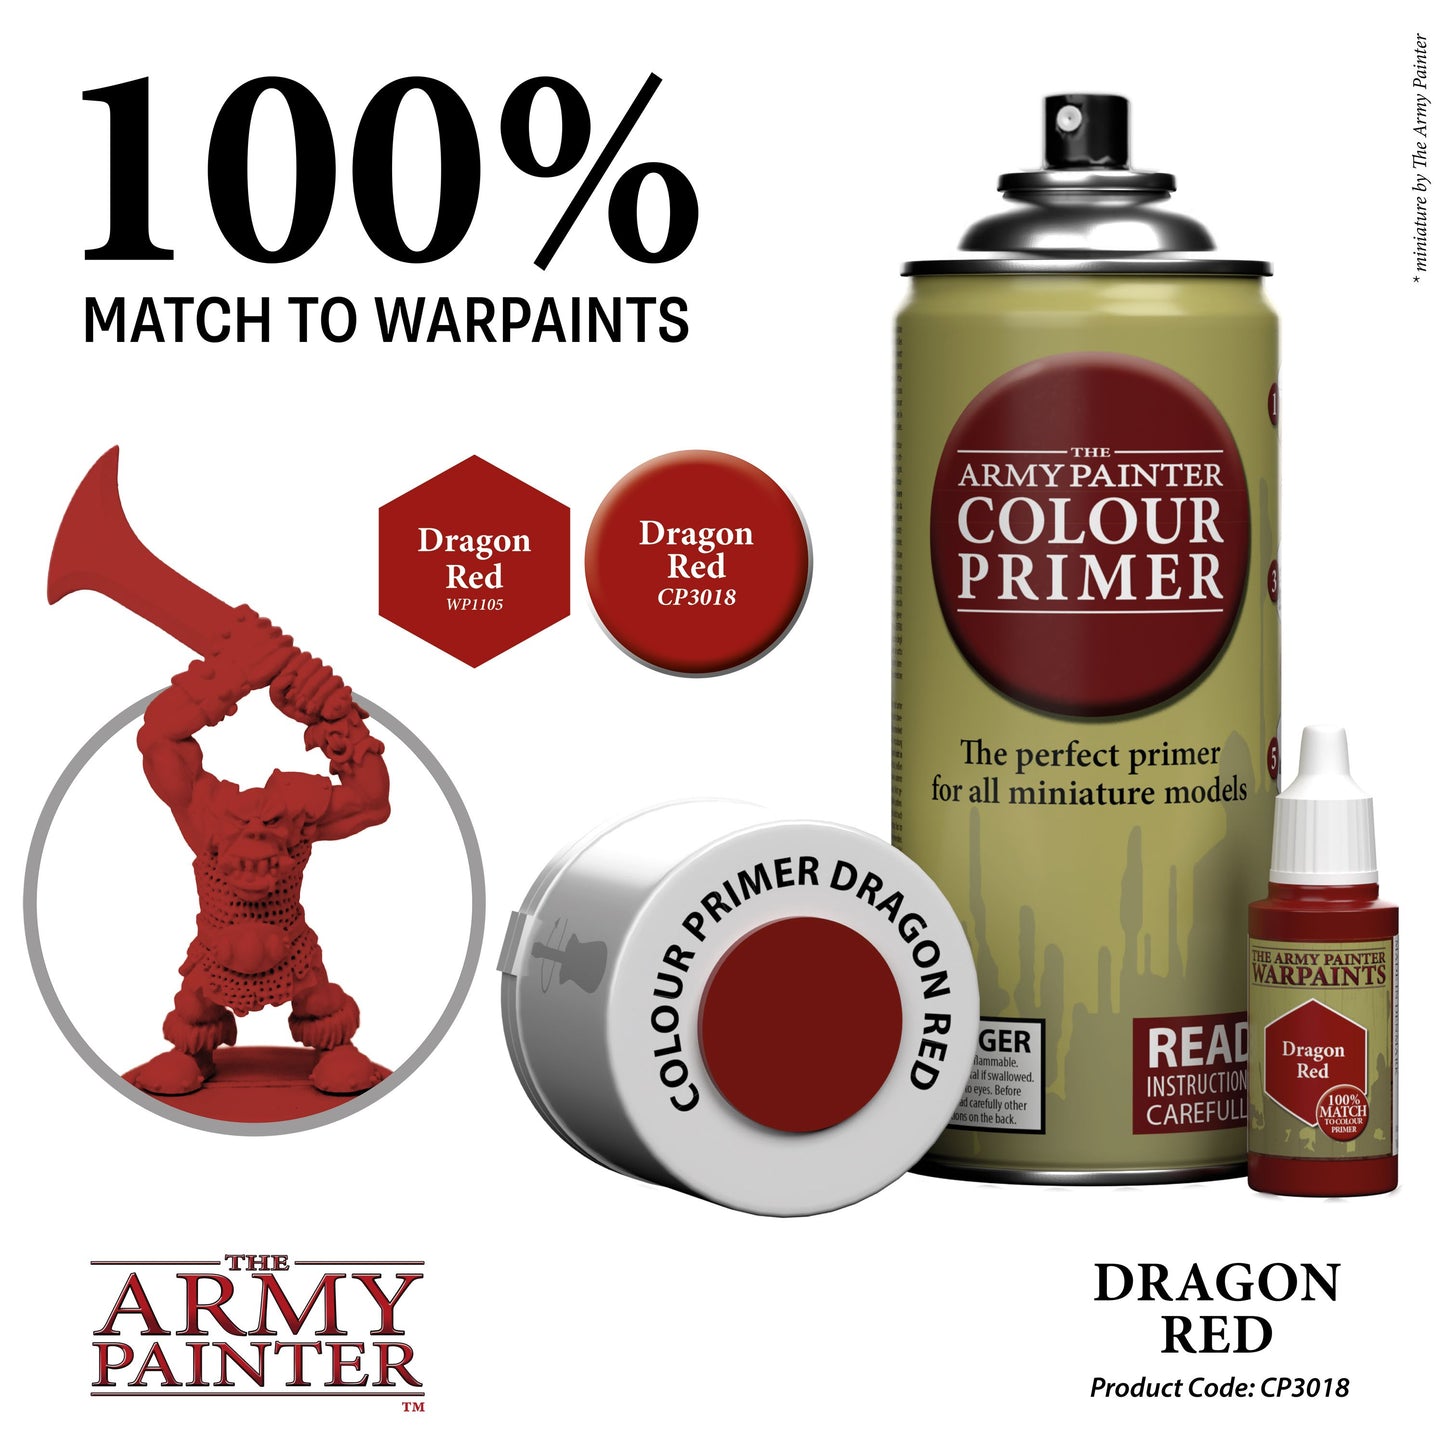 The Army Painter - Colour Primer: Dragon Red